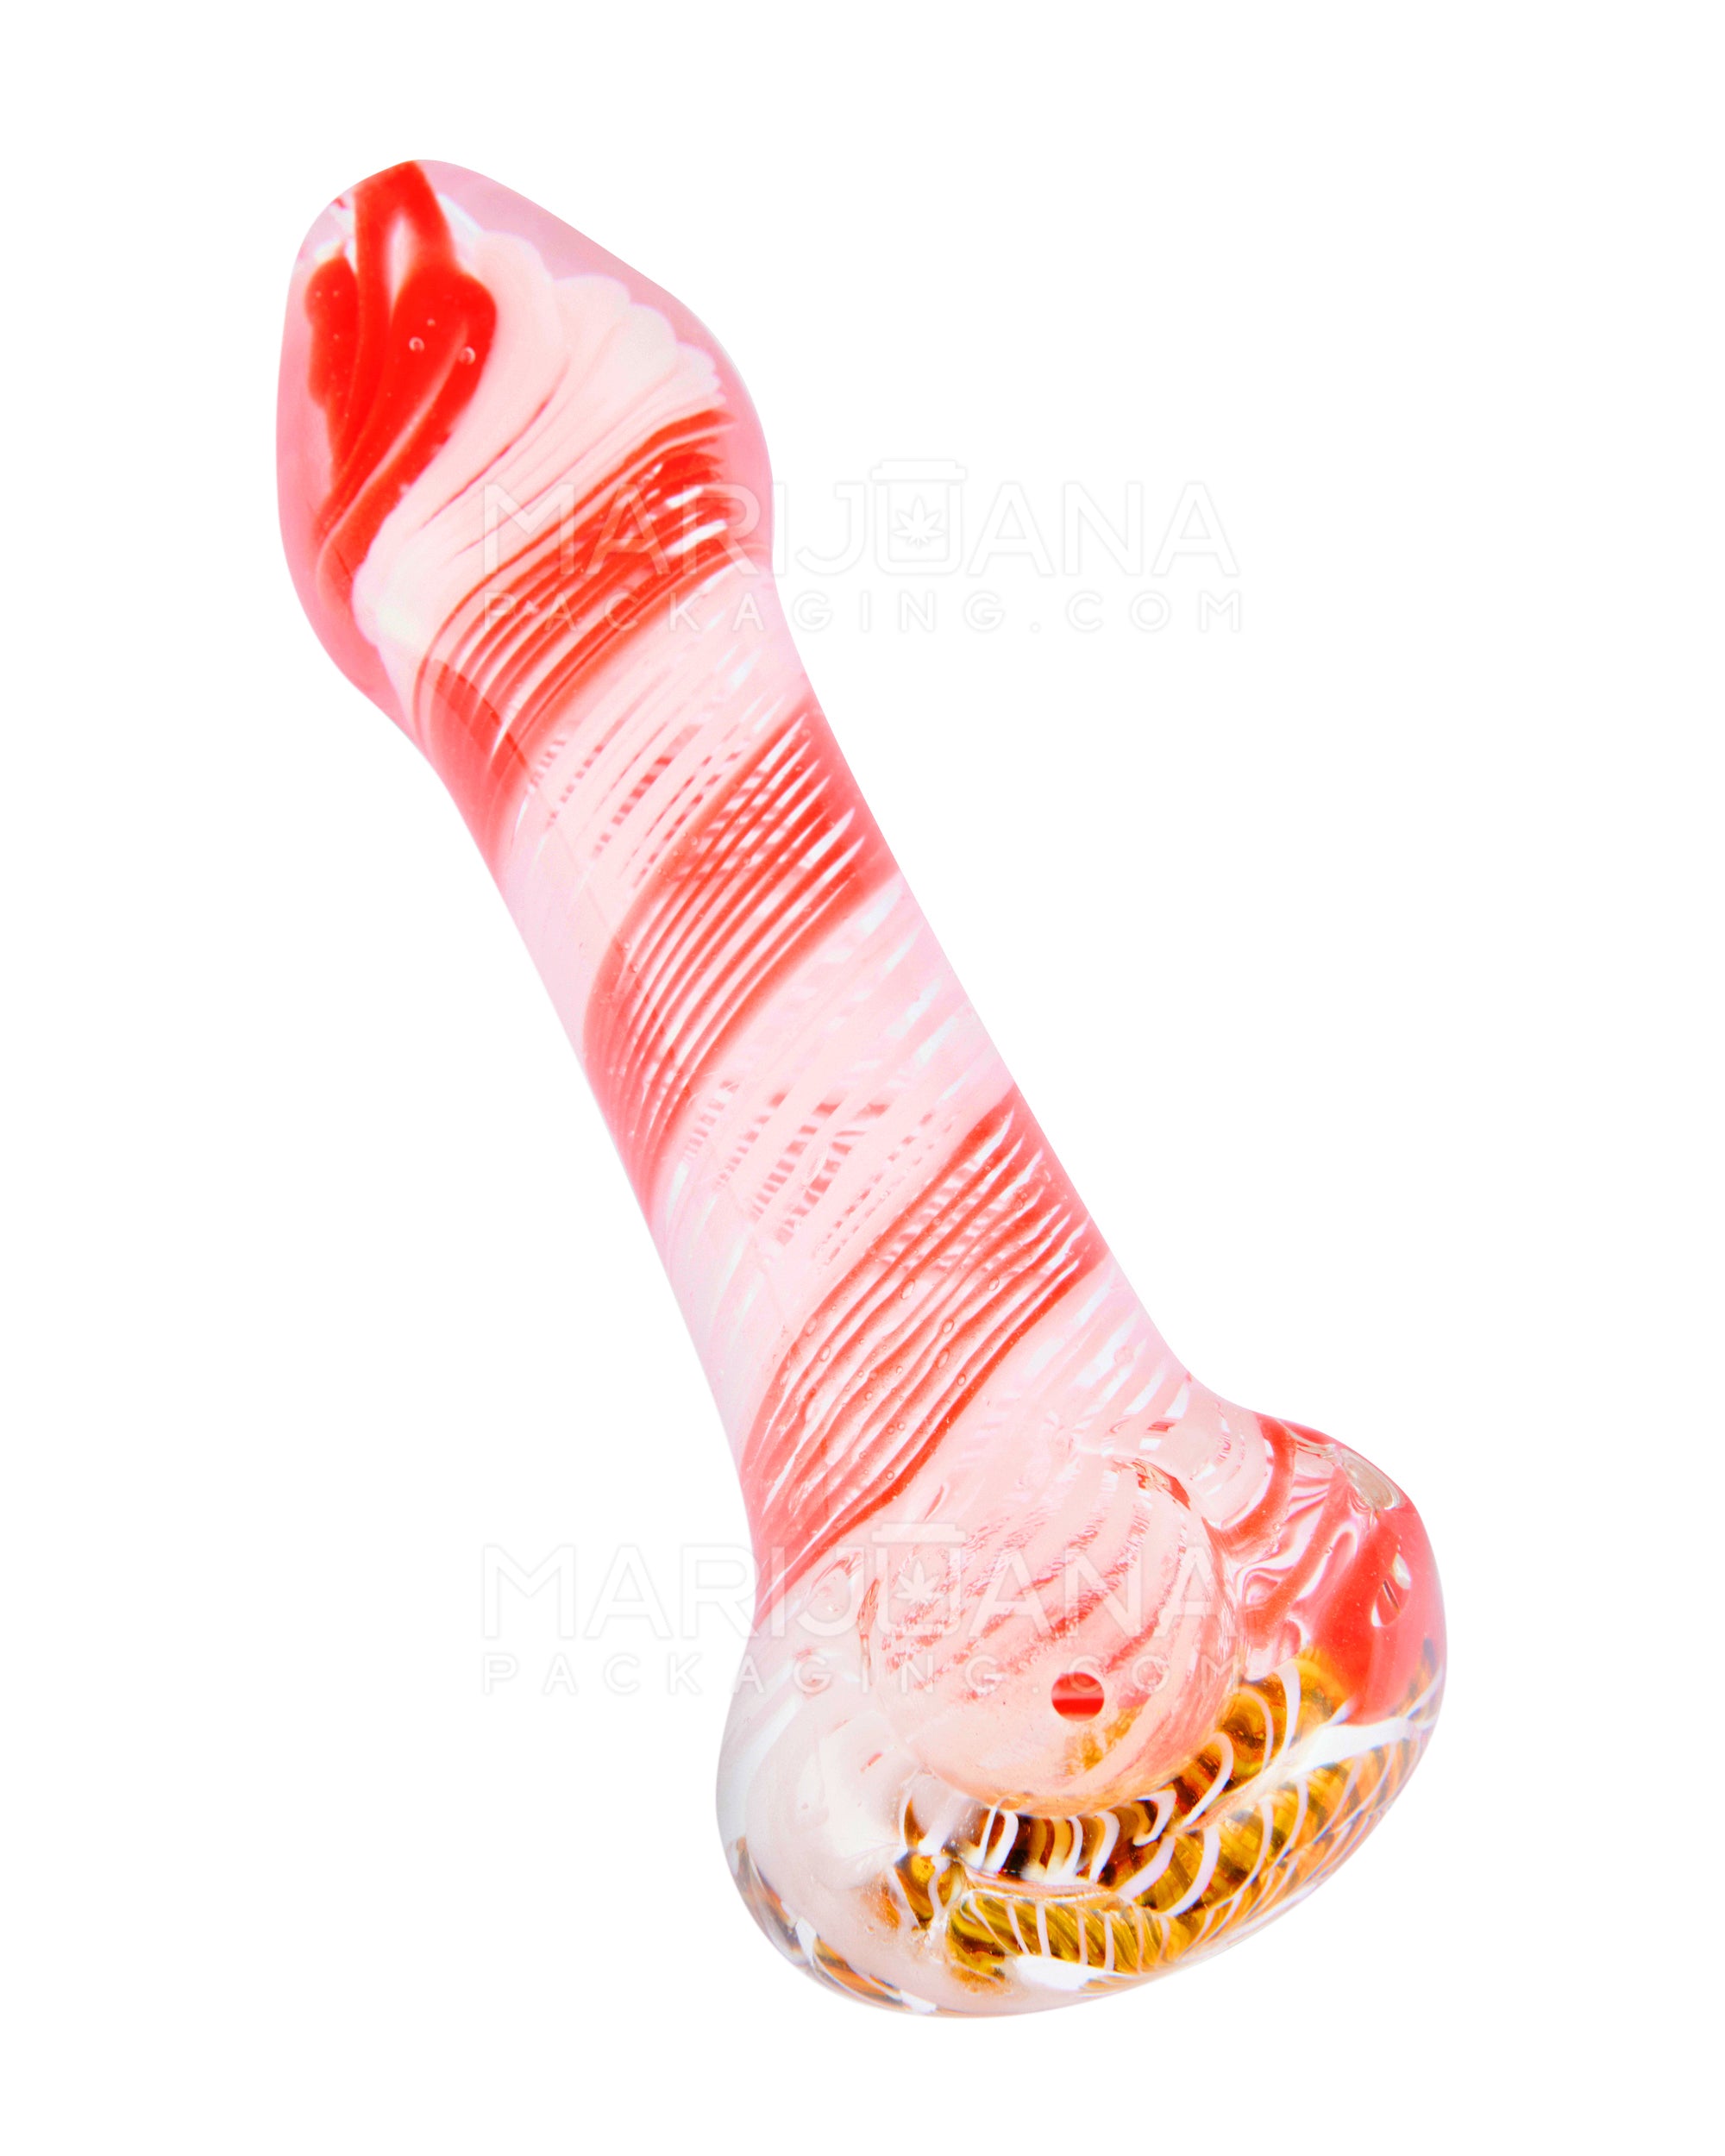 Variety Mouthpiece Spiral Spoon Hand Pipe w/ Ribboning | 4.5in Long - Glass - Assorted - 9